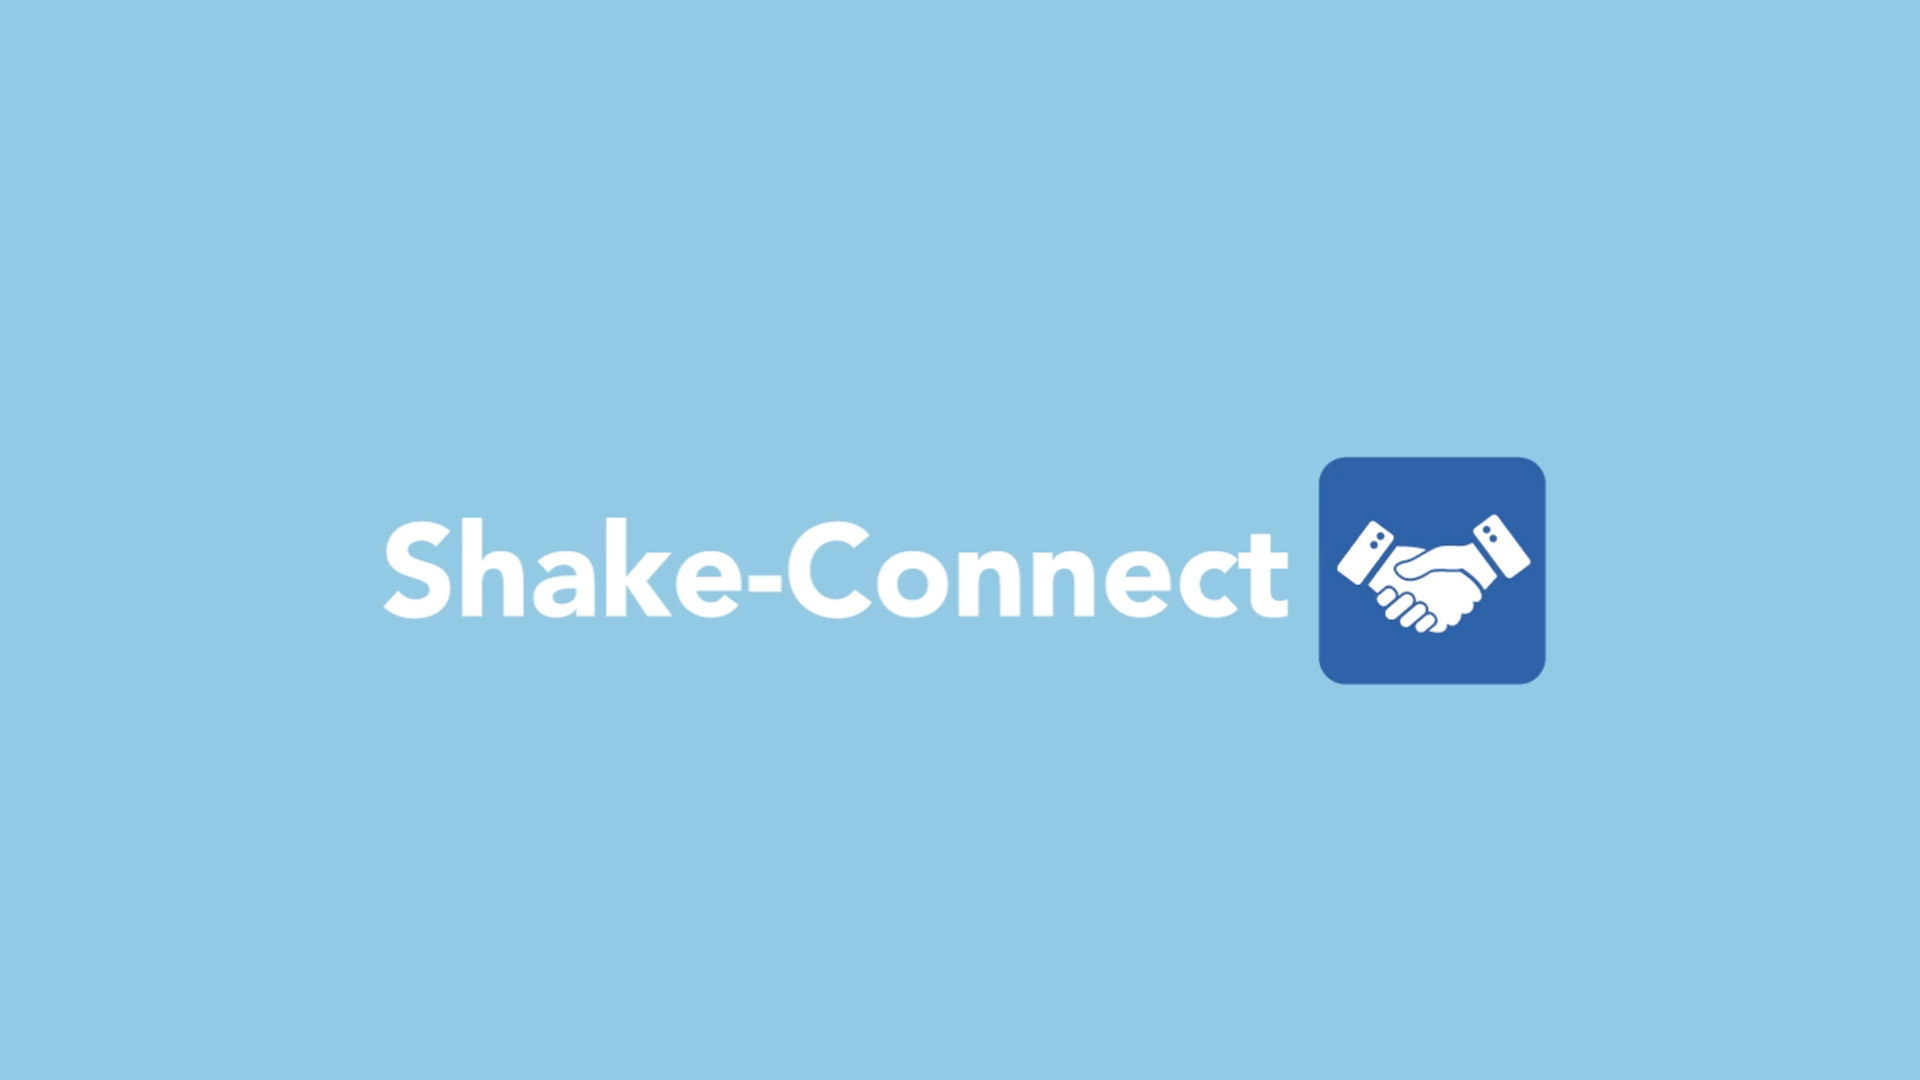 Shake-Connect